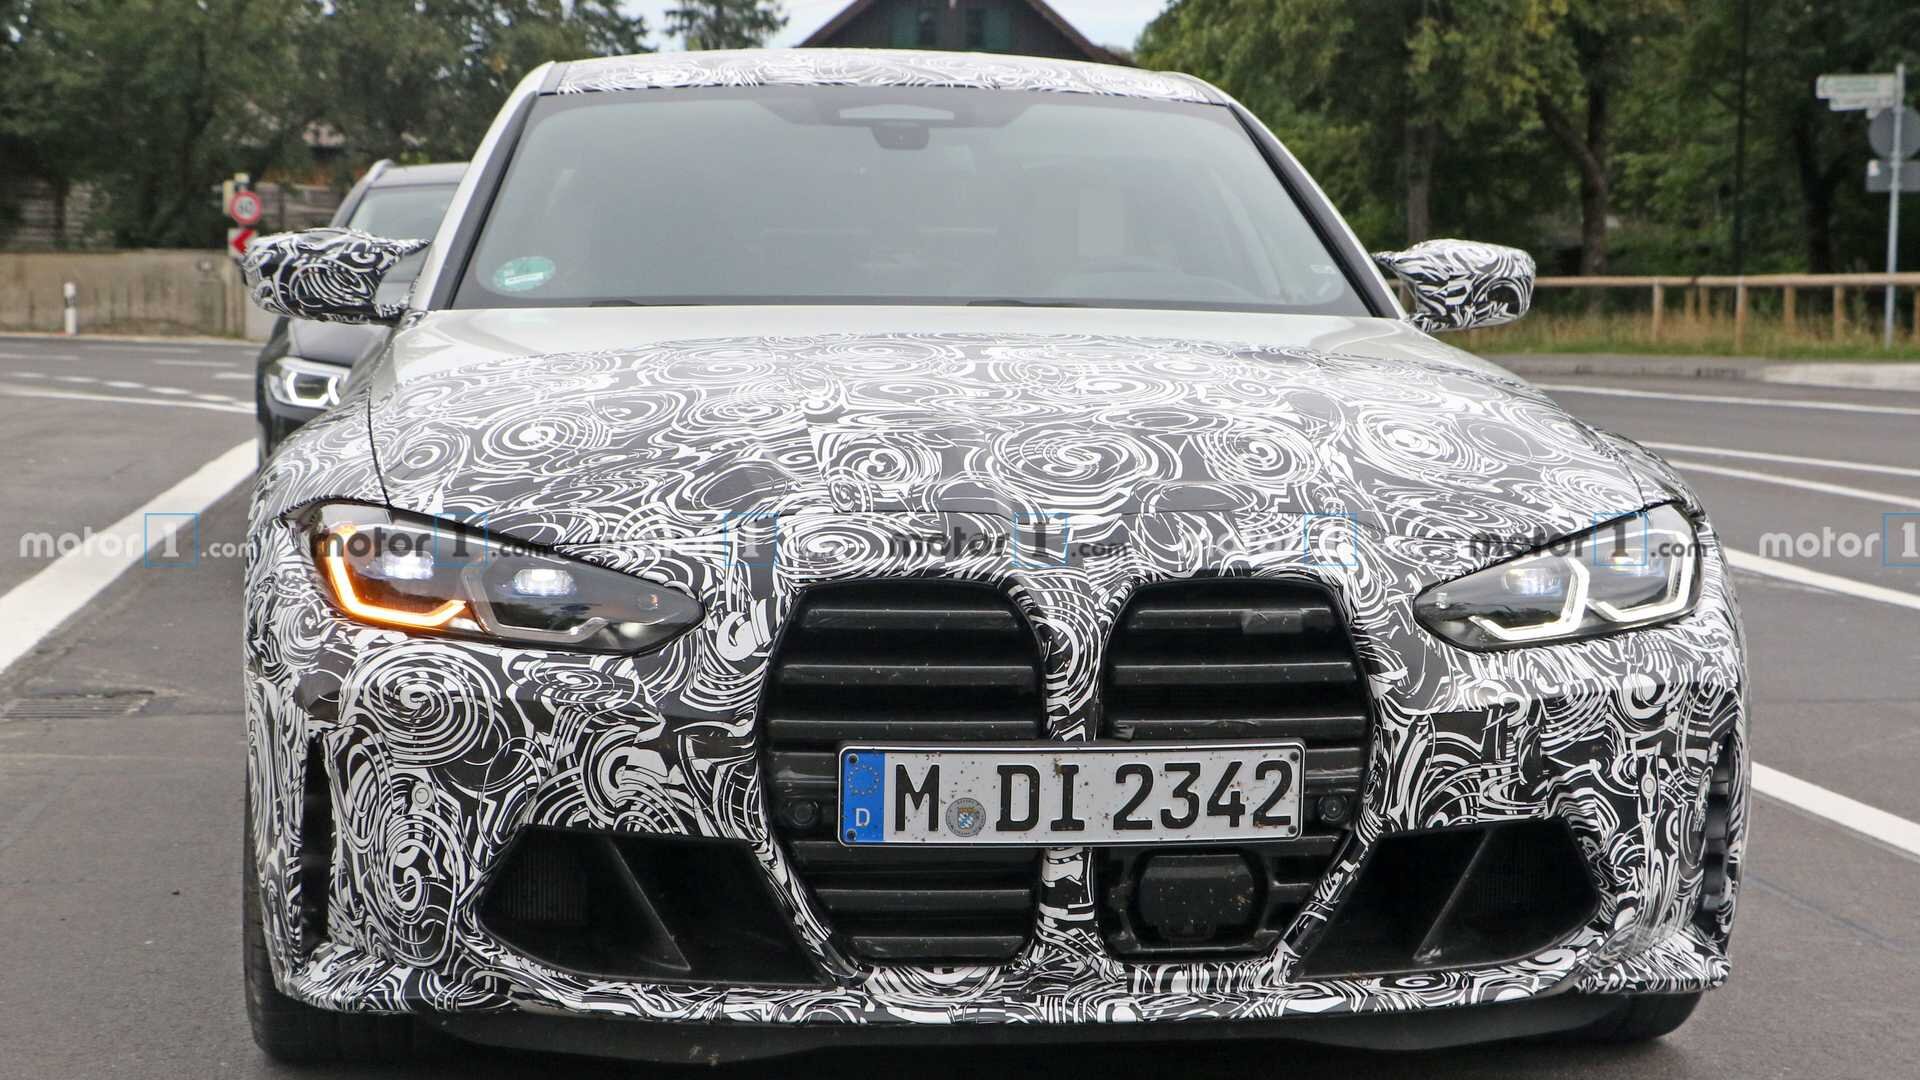 SPIED: BMW 4 Series Gran Coupe Seen Testing at the Nurburgring